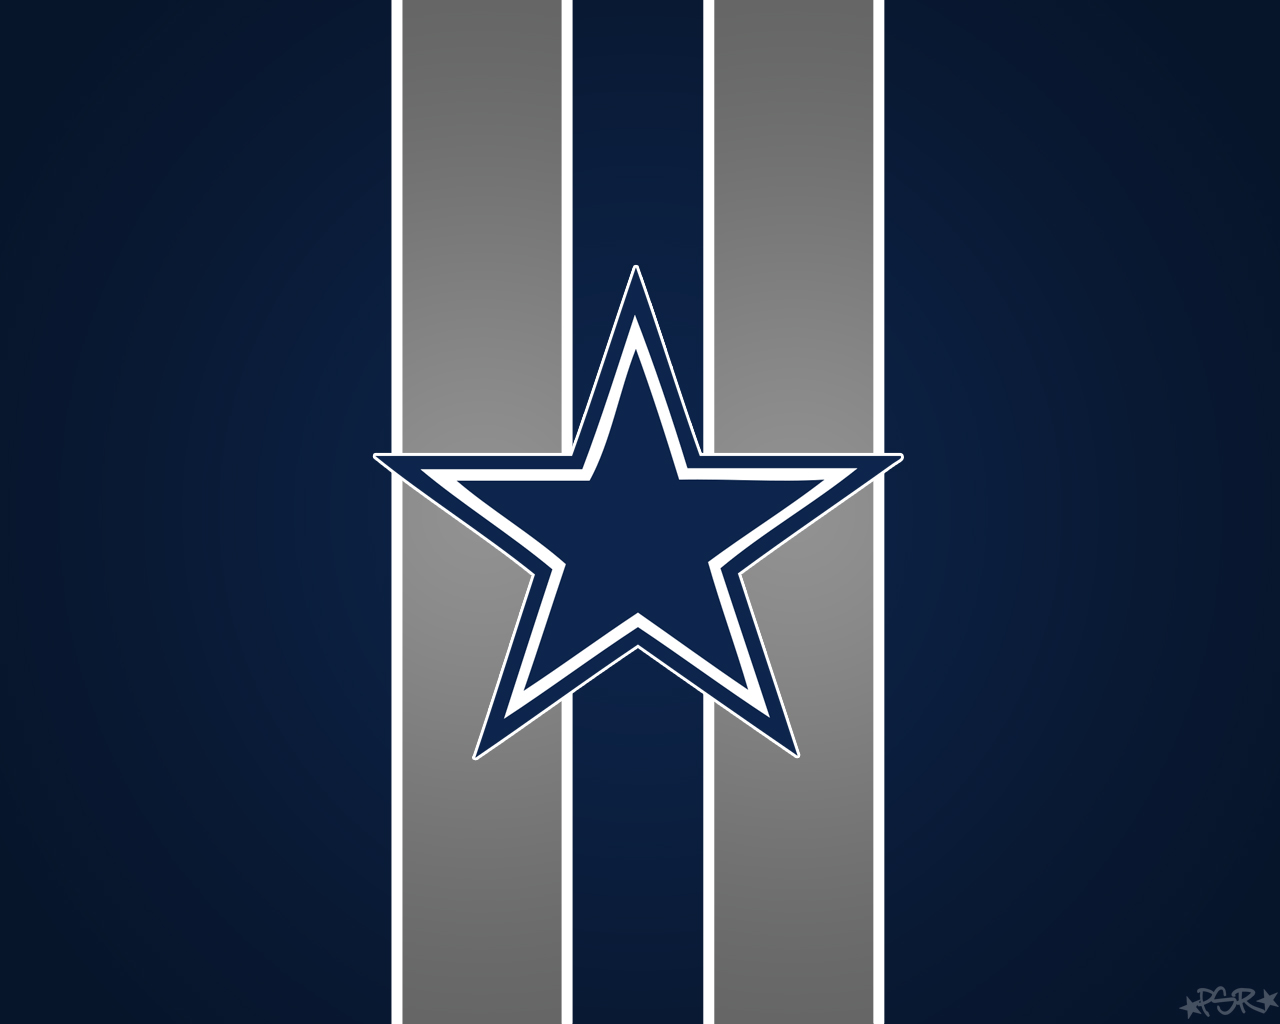 Download 21 dallas-cowboys-screen-saver Nfl-football-Wallpapers-Free-by-ZEDGE.jpg